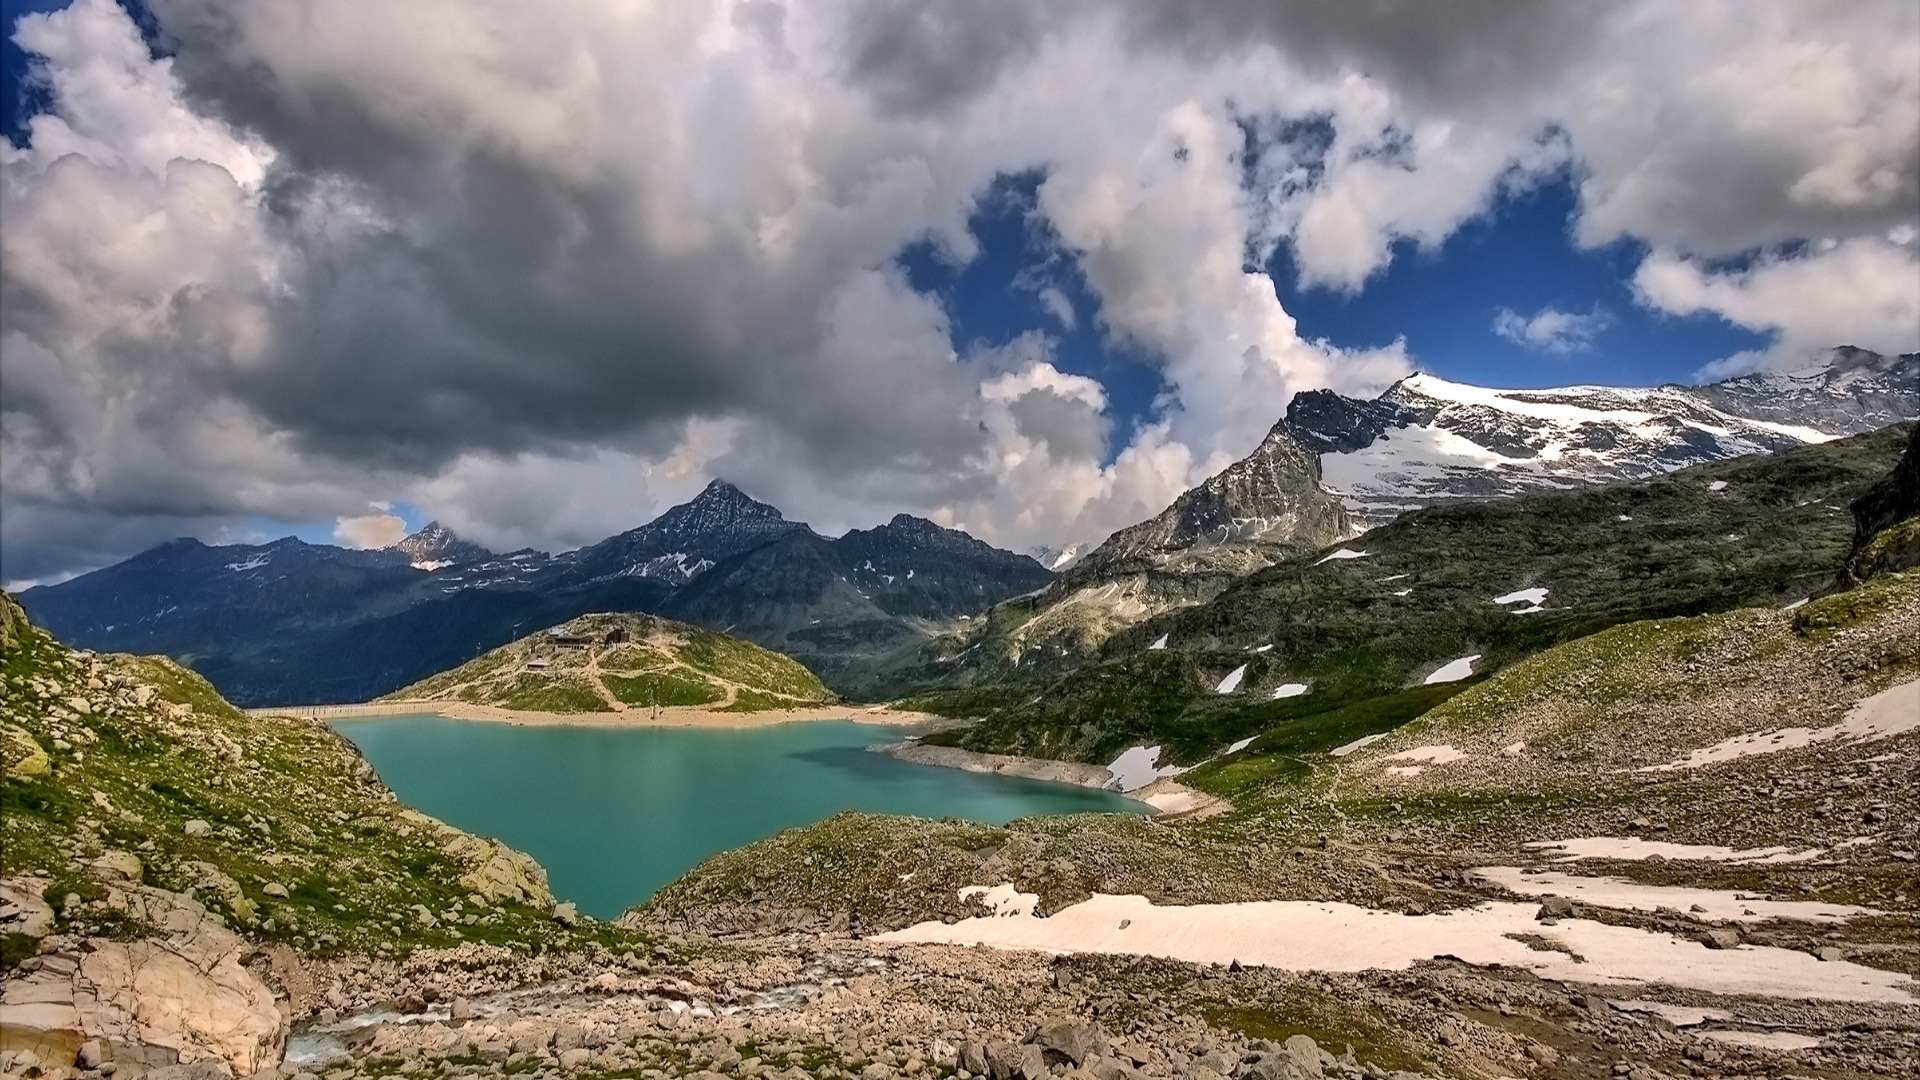 Mountains and Lake for 1920 x 1080 HDTV 1080p resolution